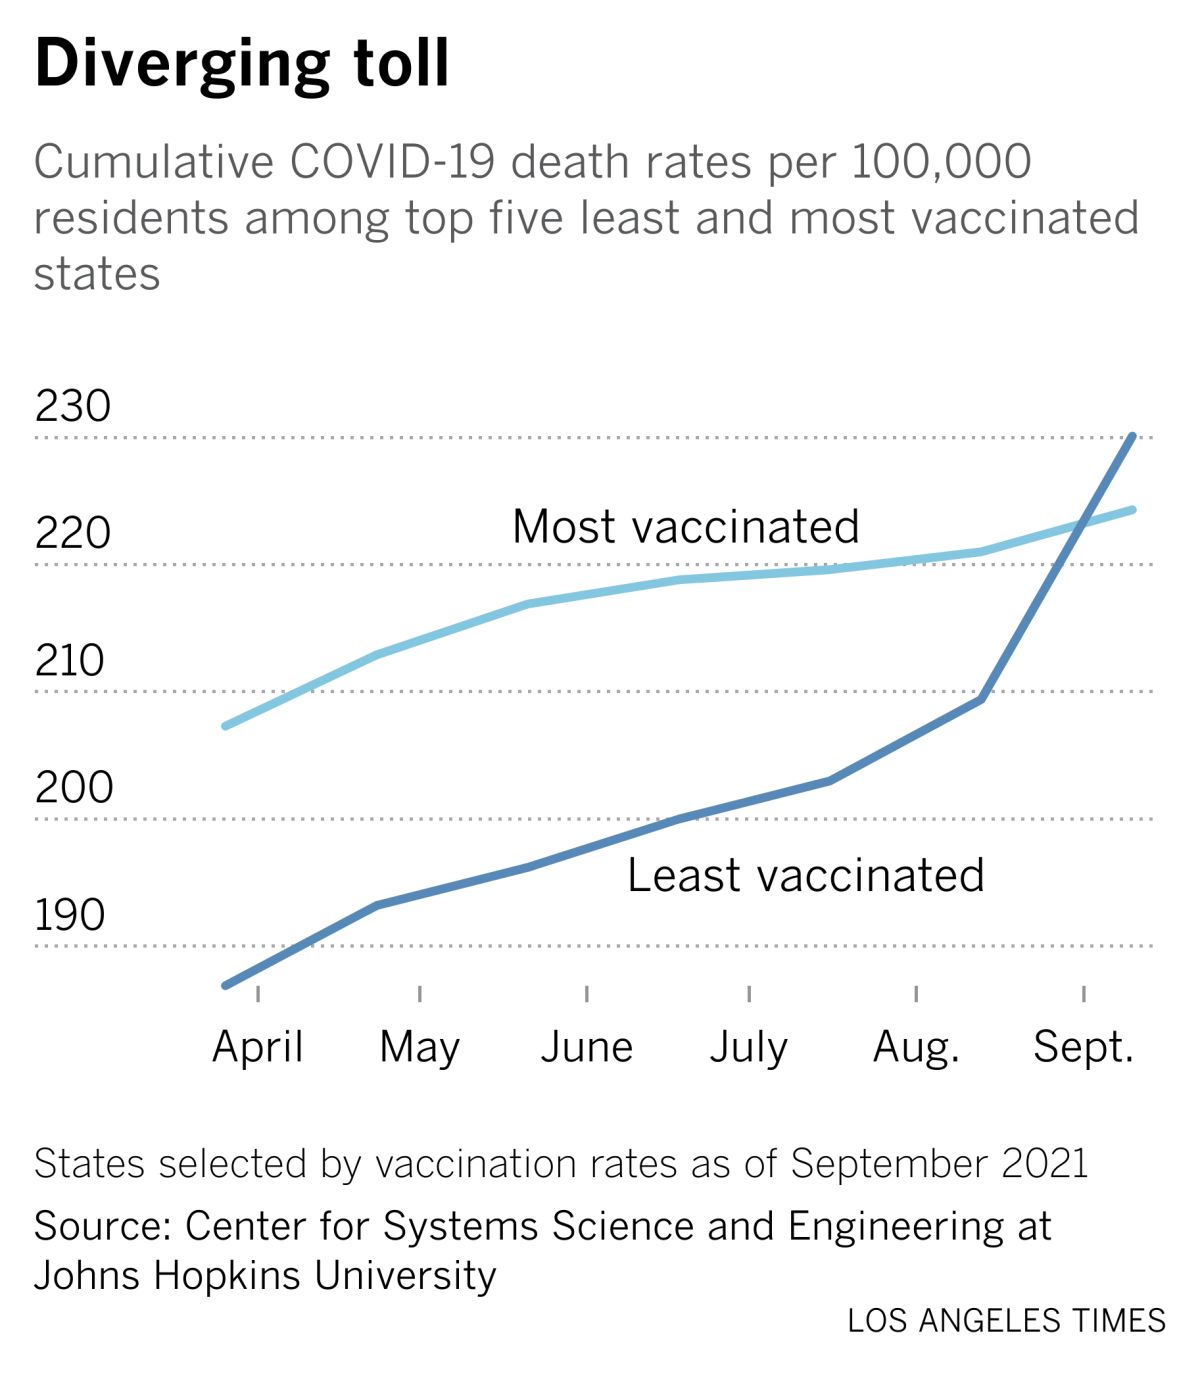 This graph shows how the COVID-19 death toll has diverged between states with high and low vaccination rates.